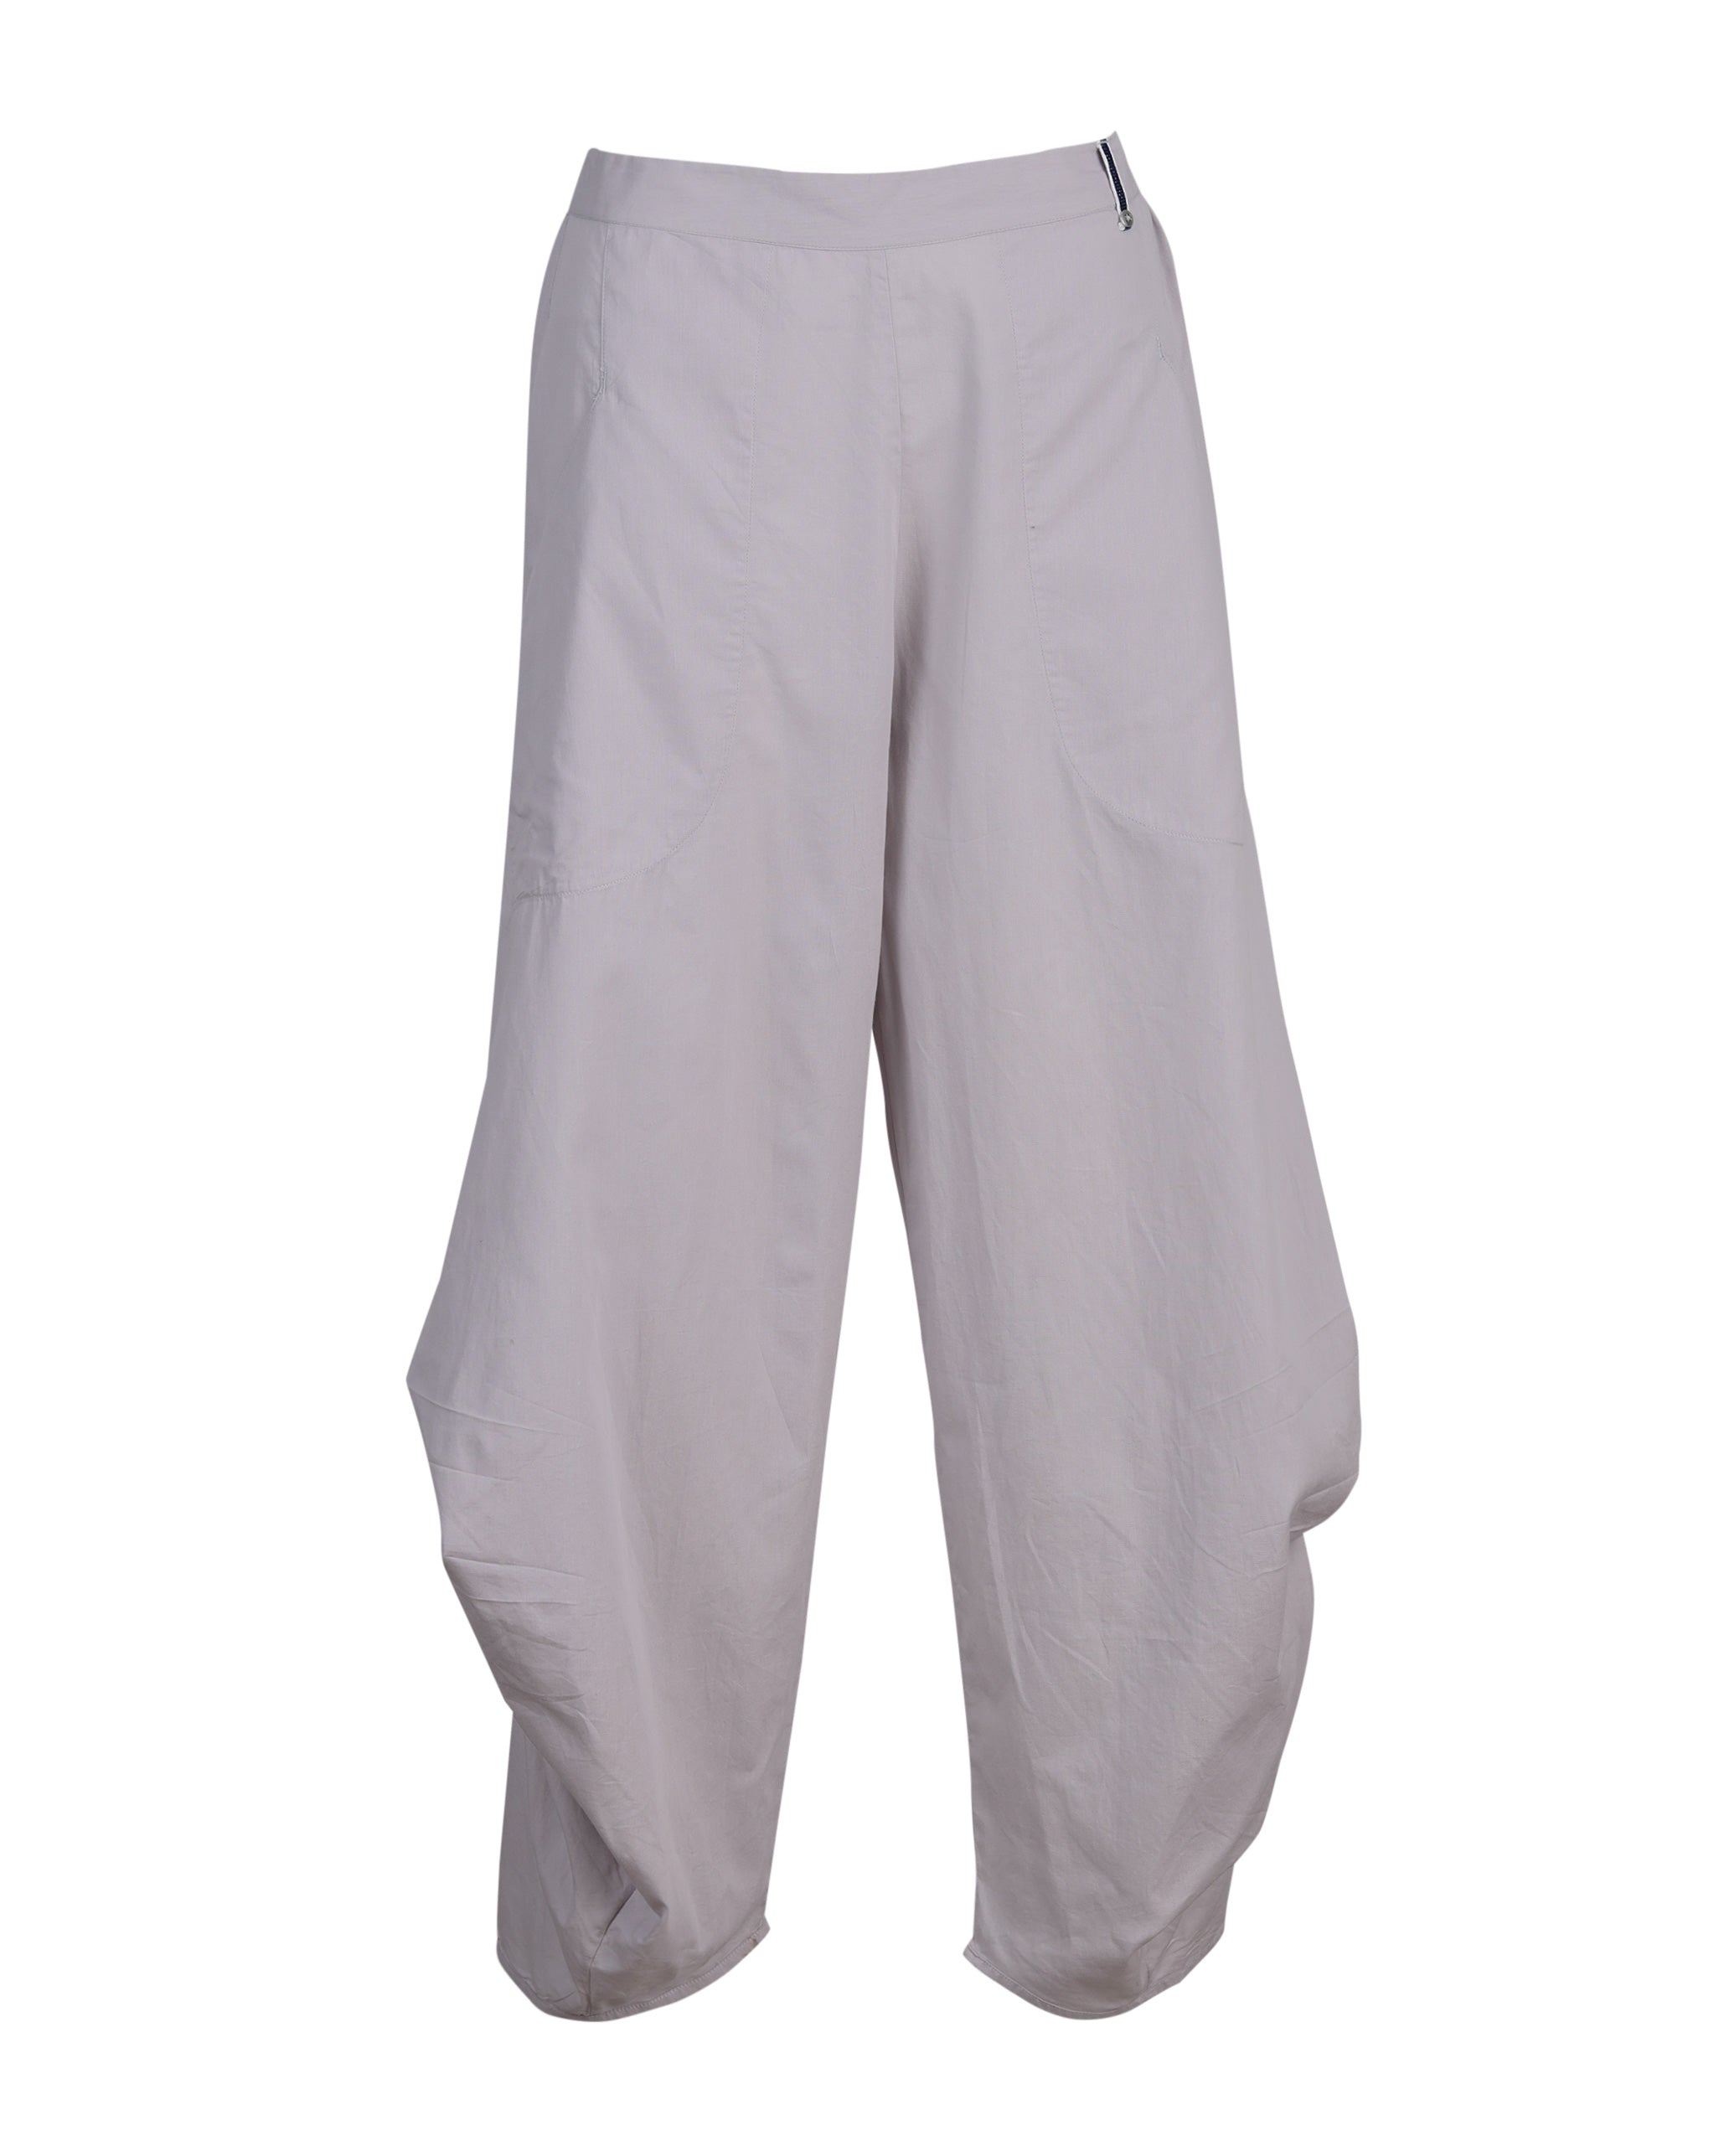 Boat Cropped Pants - Soft Grey